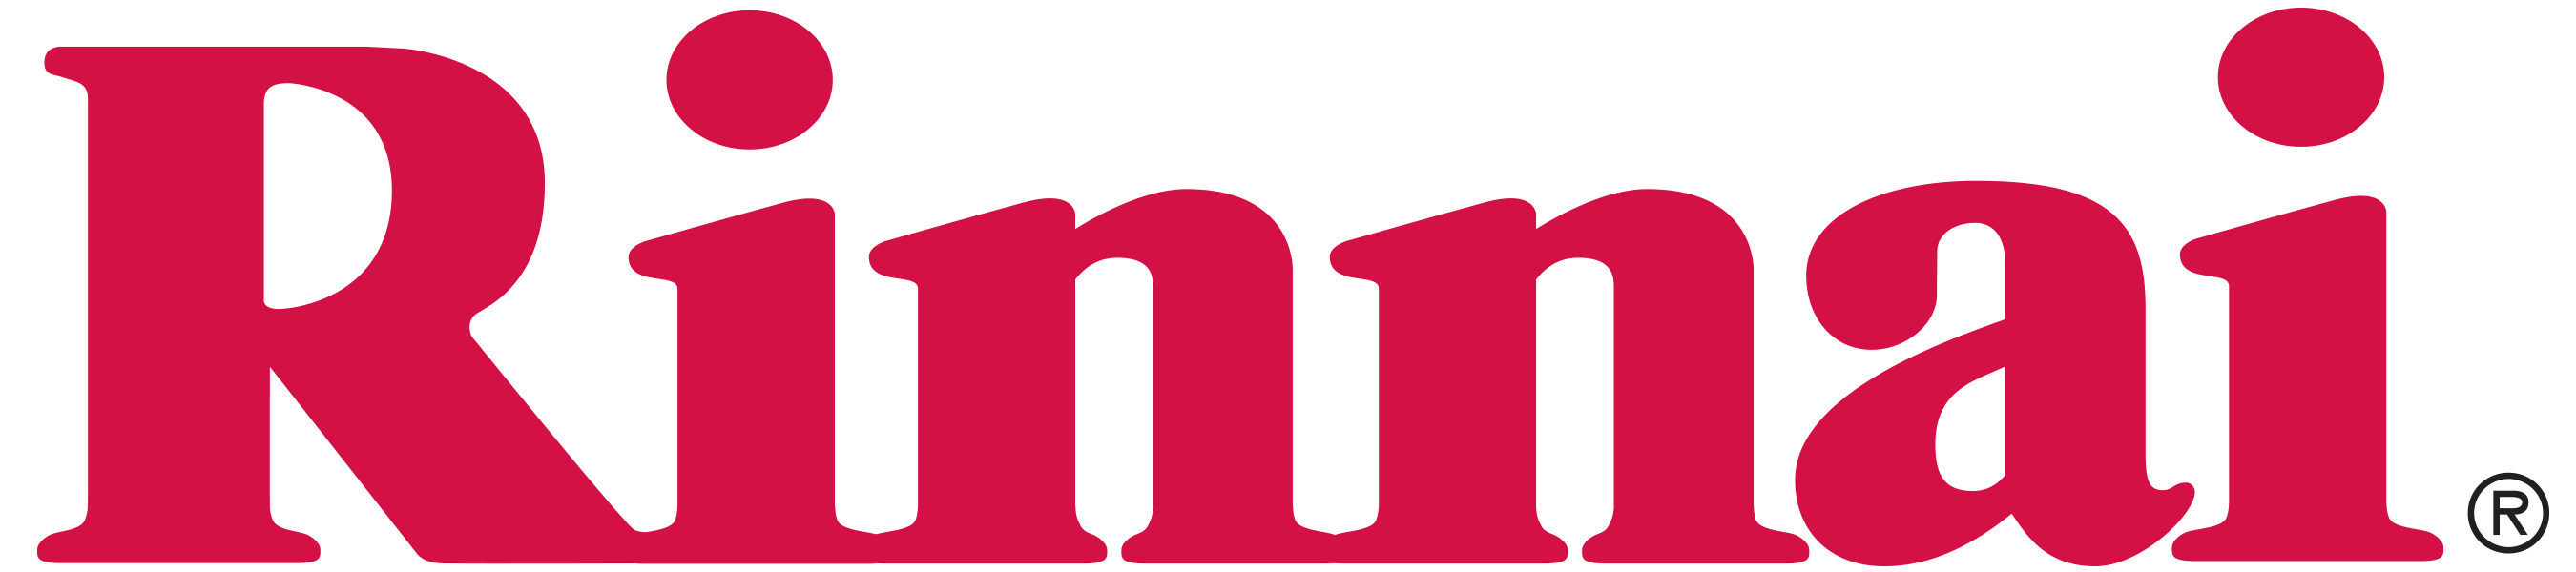 As the technology leader in its industry, Rinnai is the number-one selling brand of tankless water heaters in the United States and Canada.